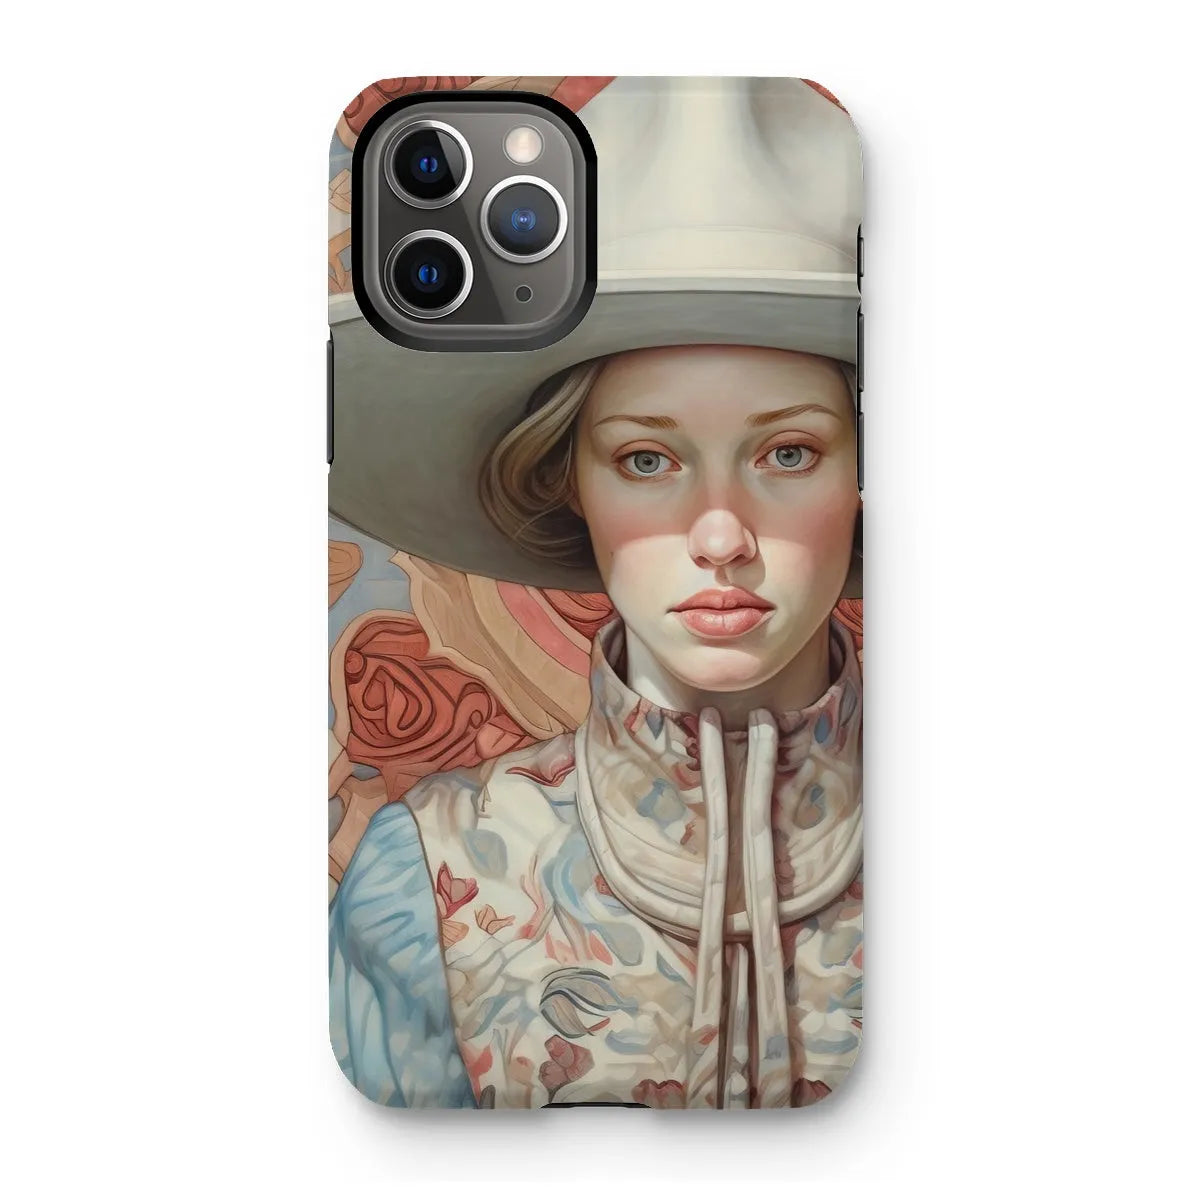 Lottie The Lesbian Cowgirl - Sapphic Art Phone Case - Iphone 11 Pro / Matte - Mobile Phone Cases - Aesthetic Art